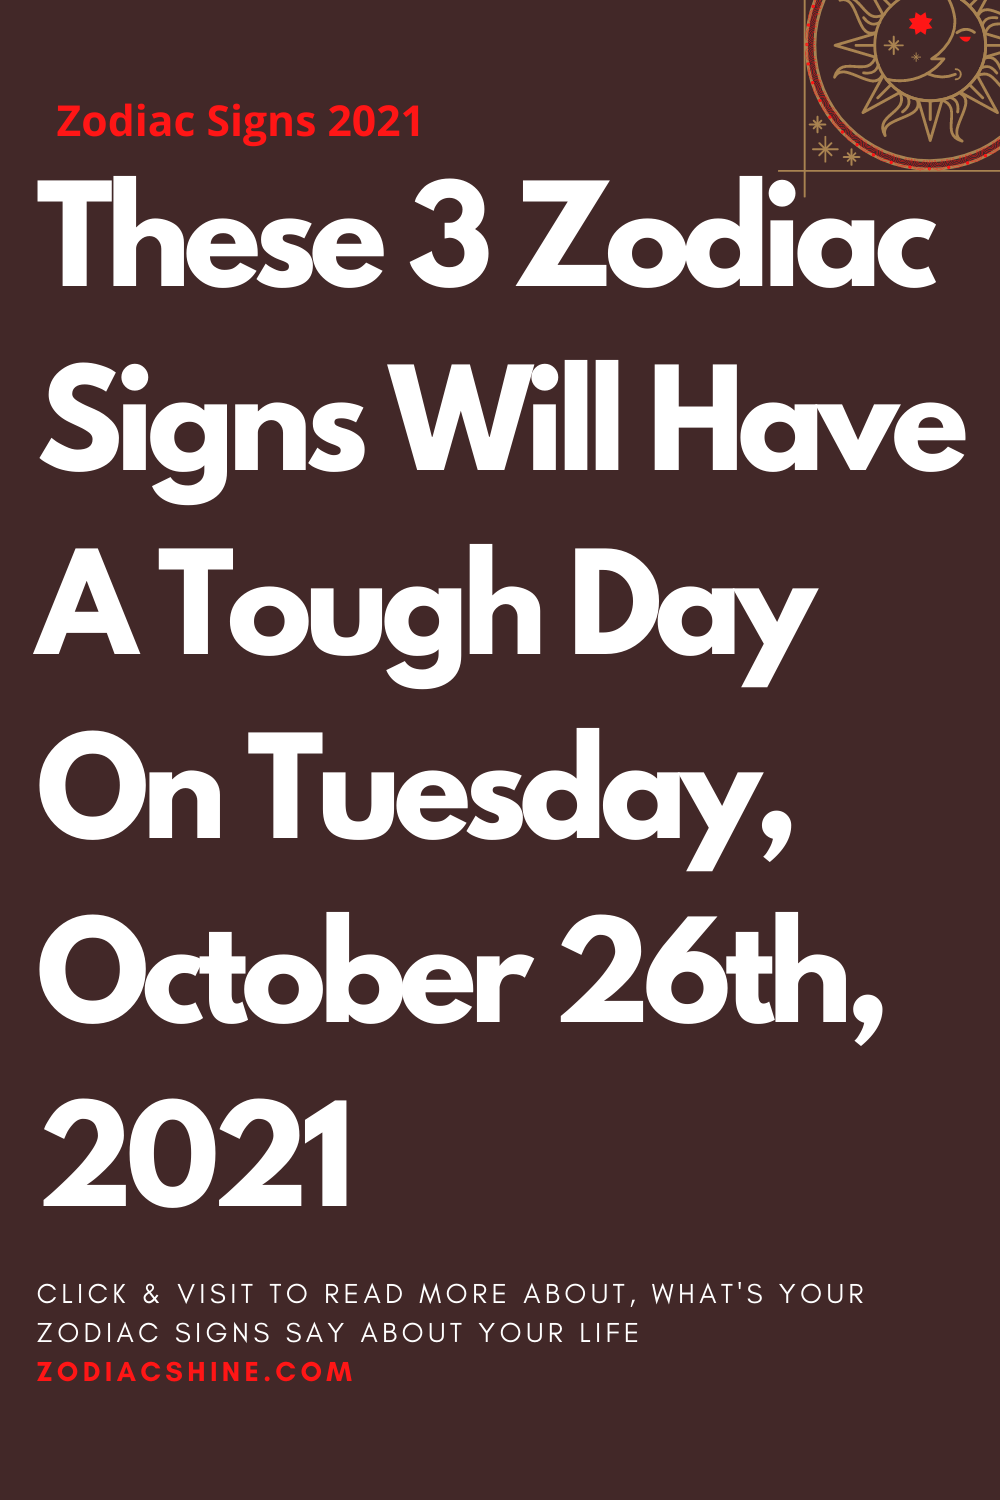 These 3 Zodiac Signs Will Have A Tough Day On Tuesday October 26th 2021